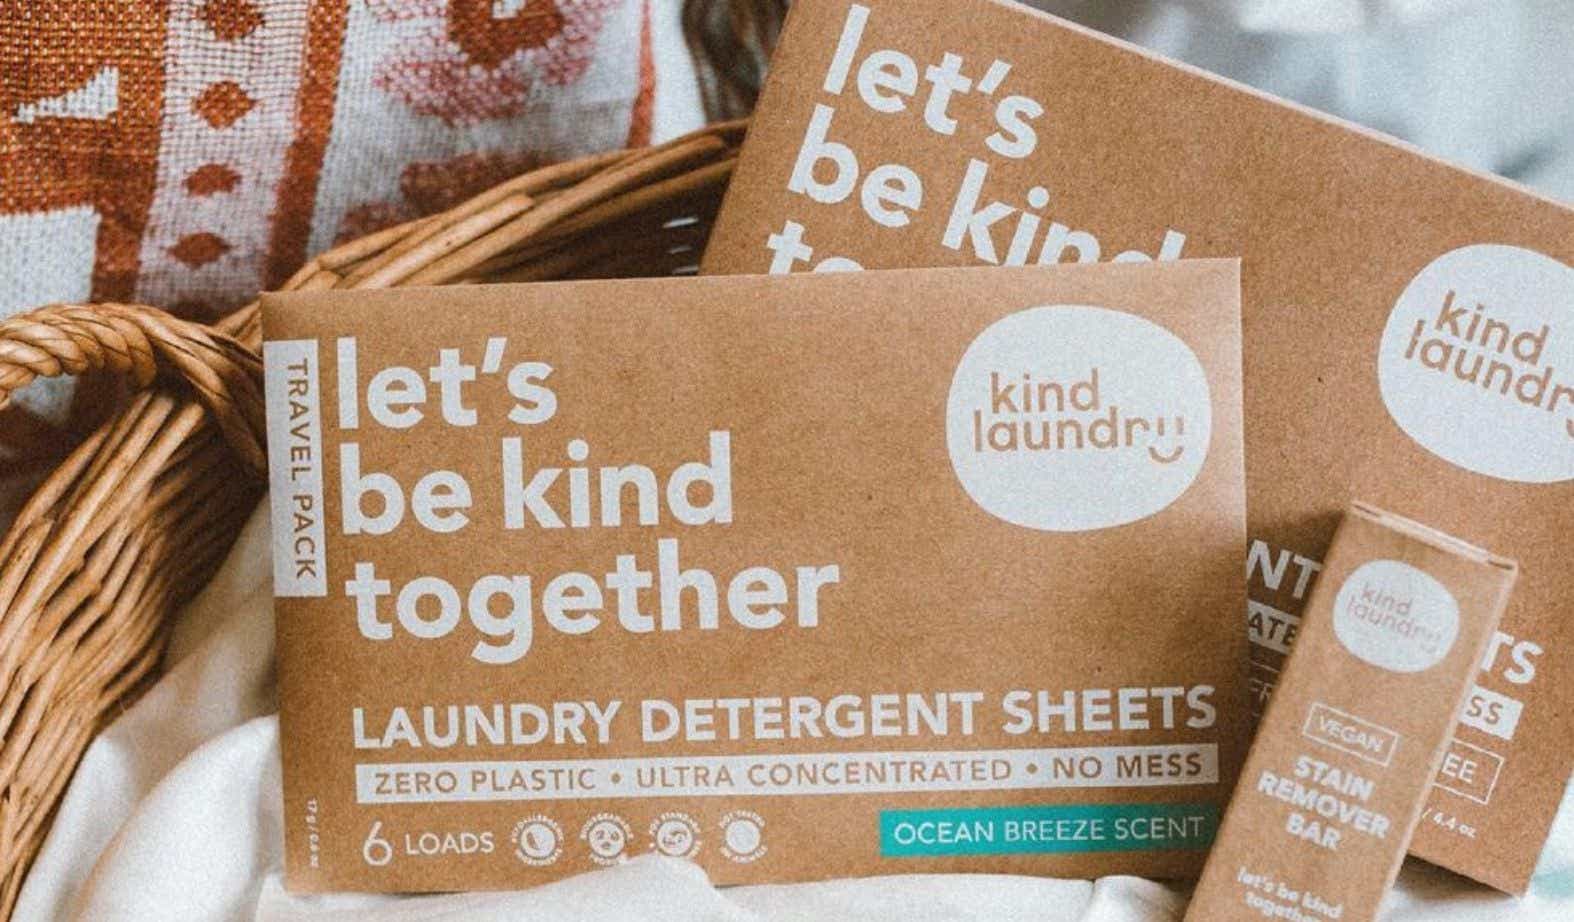 Kind Laundry products in a laundry basket